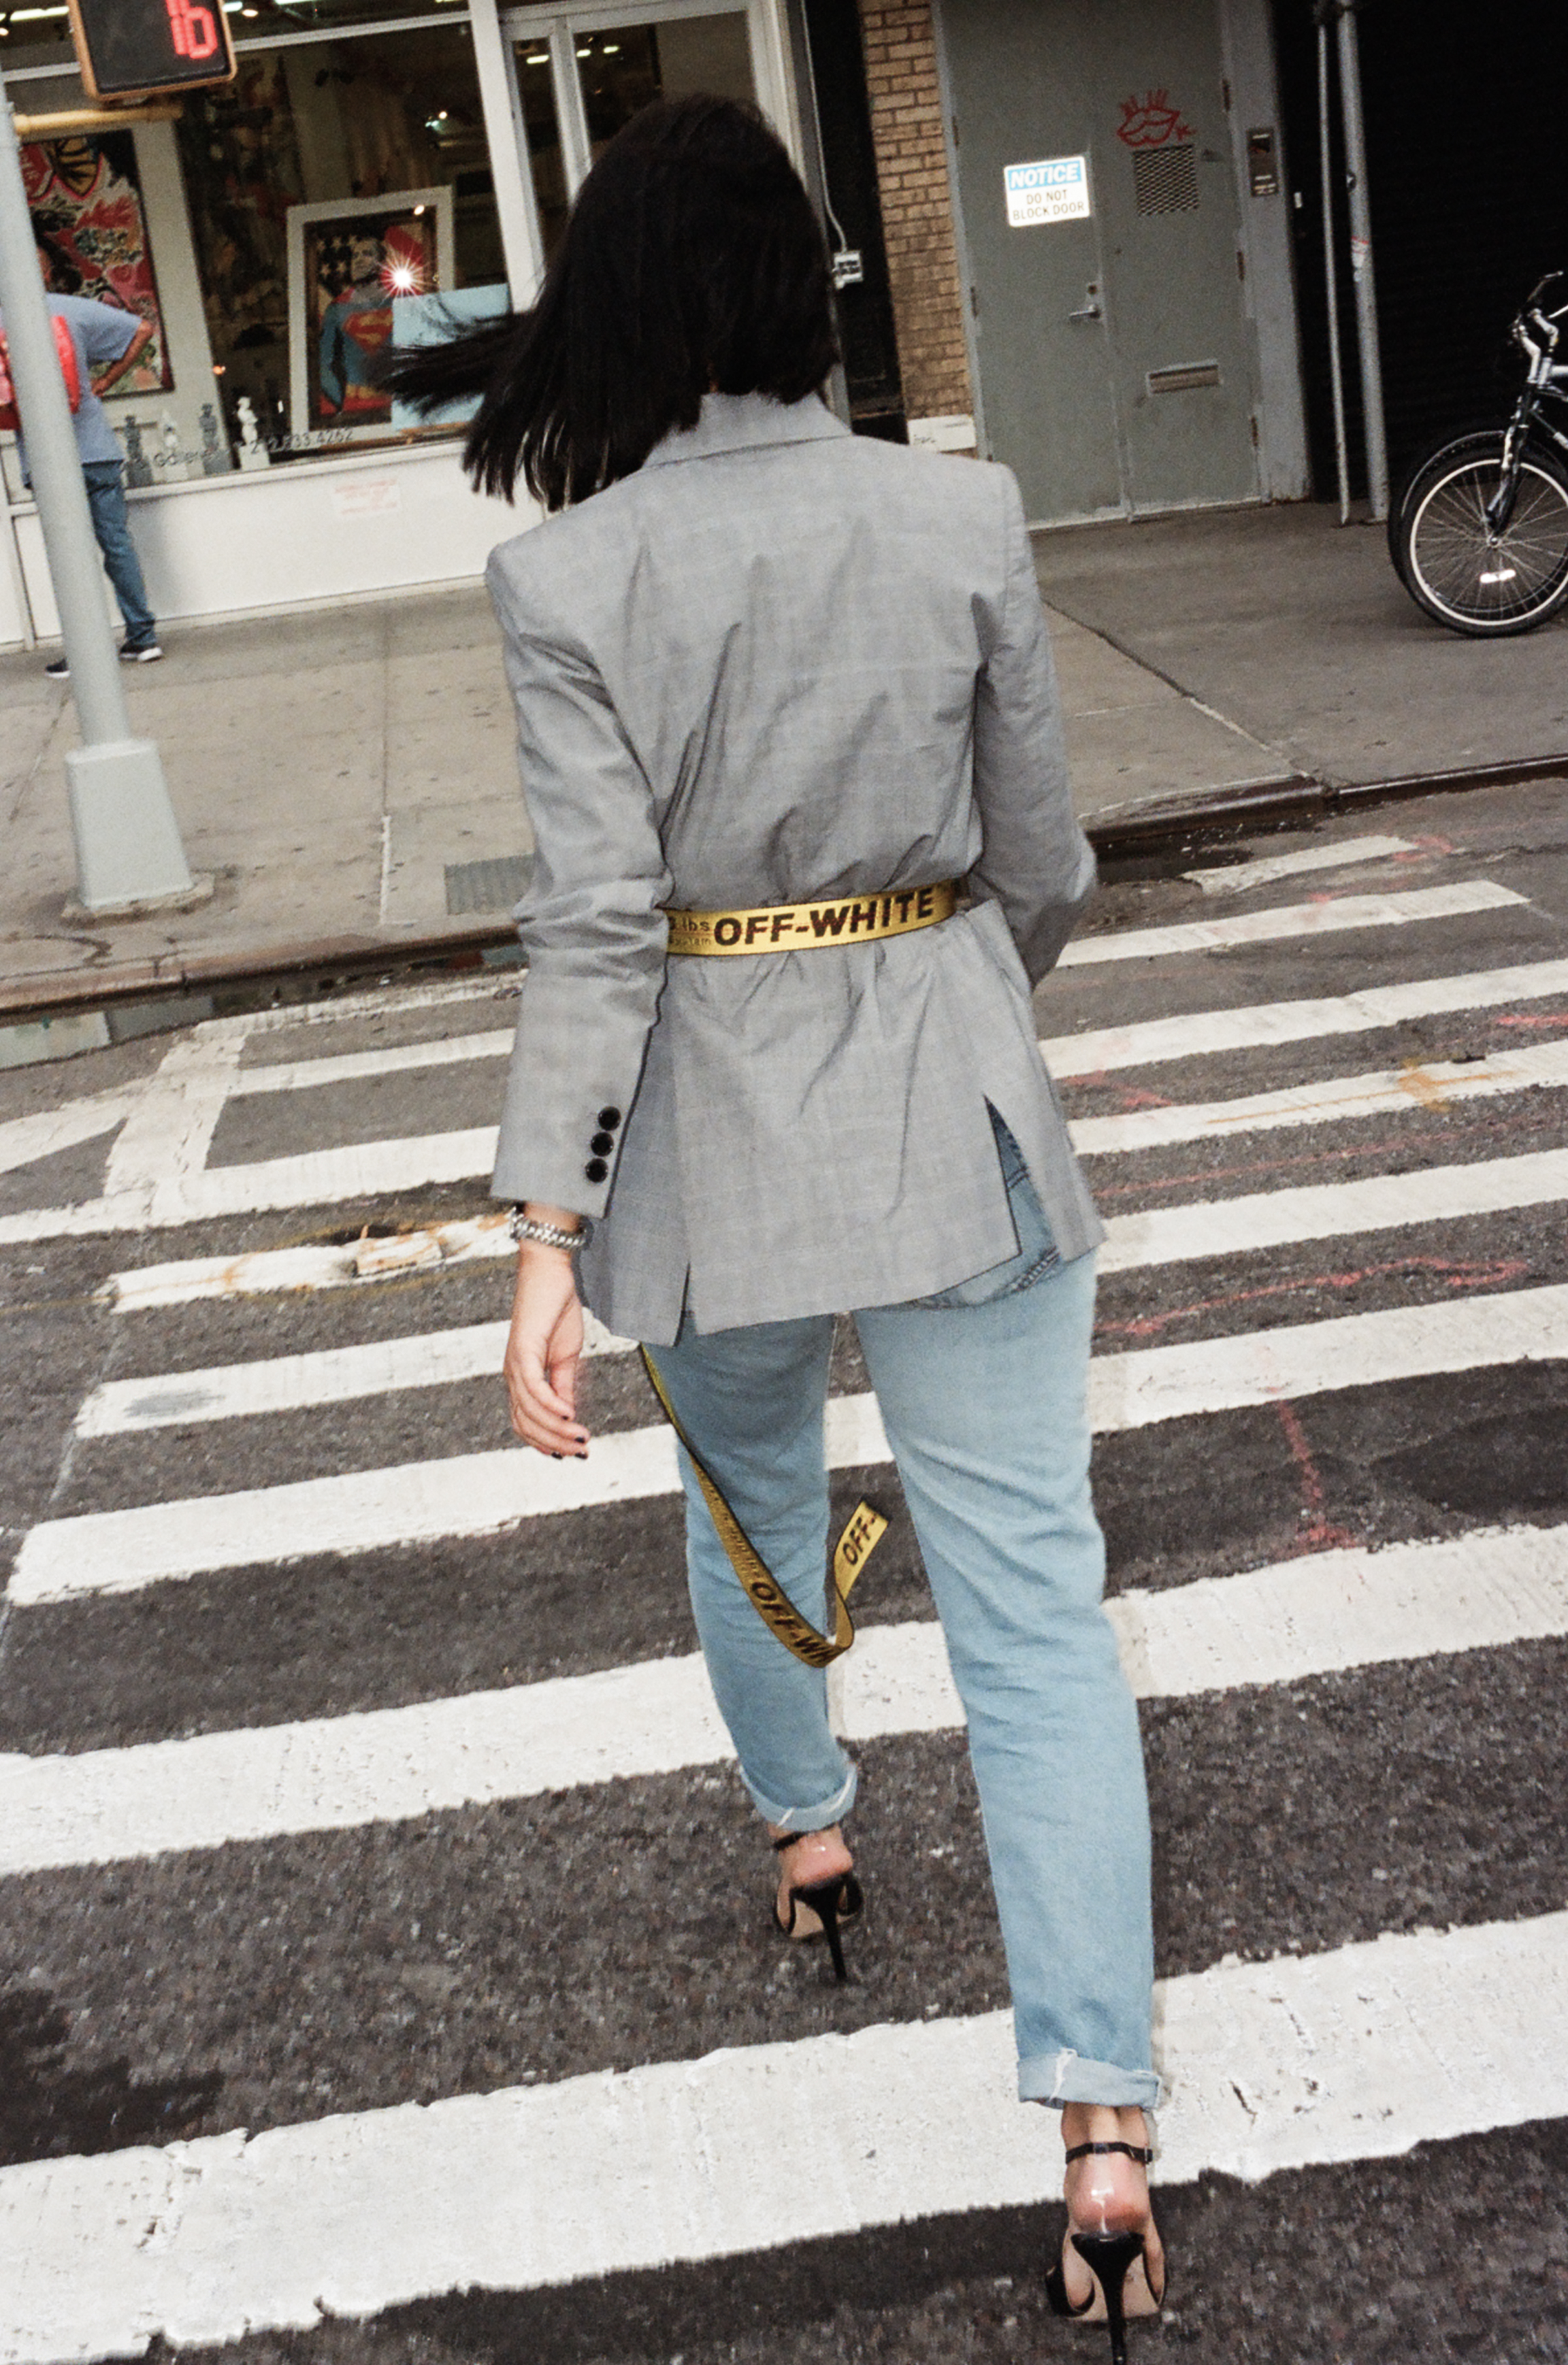 OFF-WHITE Explains How to Wear the Industrial Belt